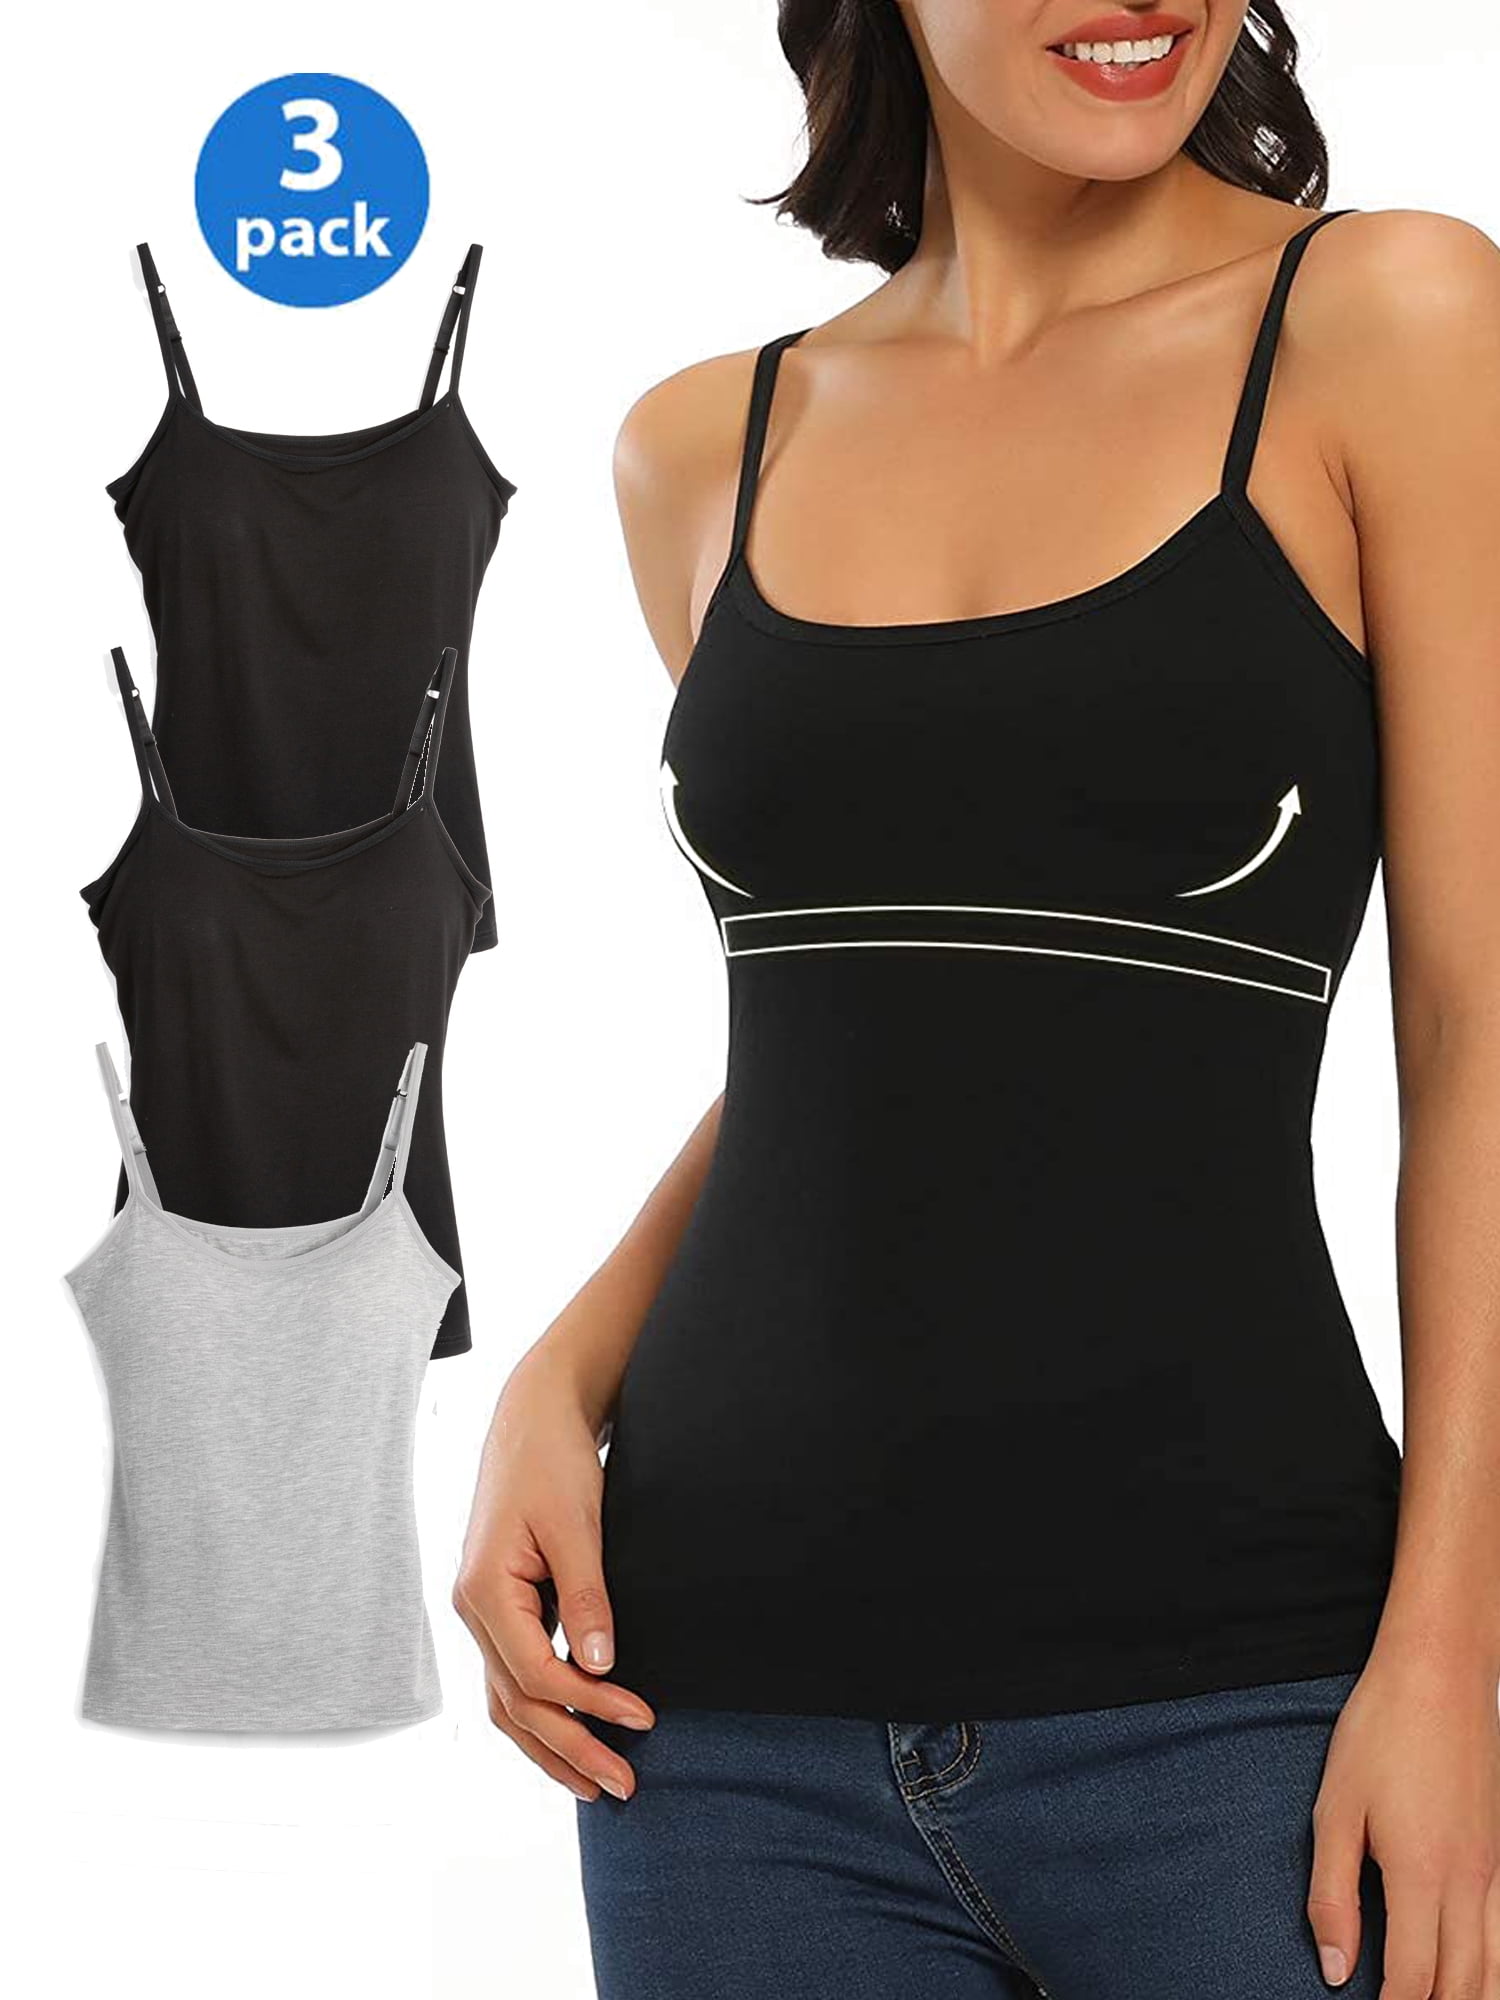 Tank With Built In Bra And Adjustable Strap Stretch Cotton Camisole For  Womens Seamless Sports Bra, Padded Shelf Included From Druzya, $34.31